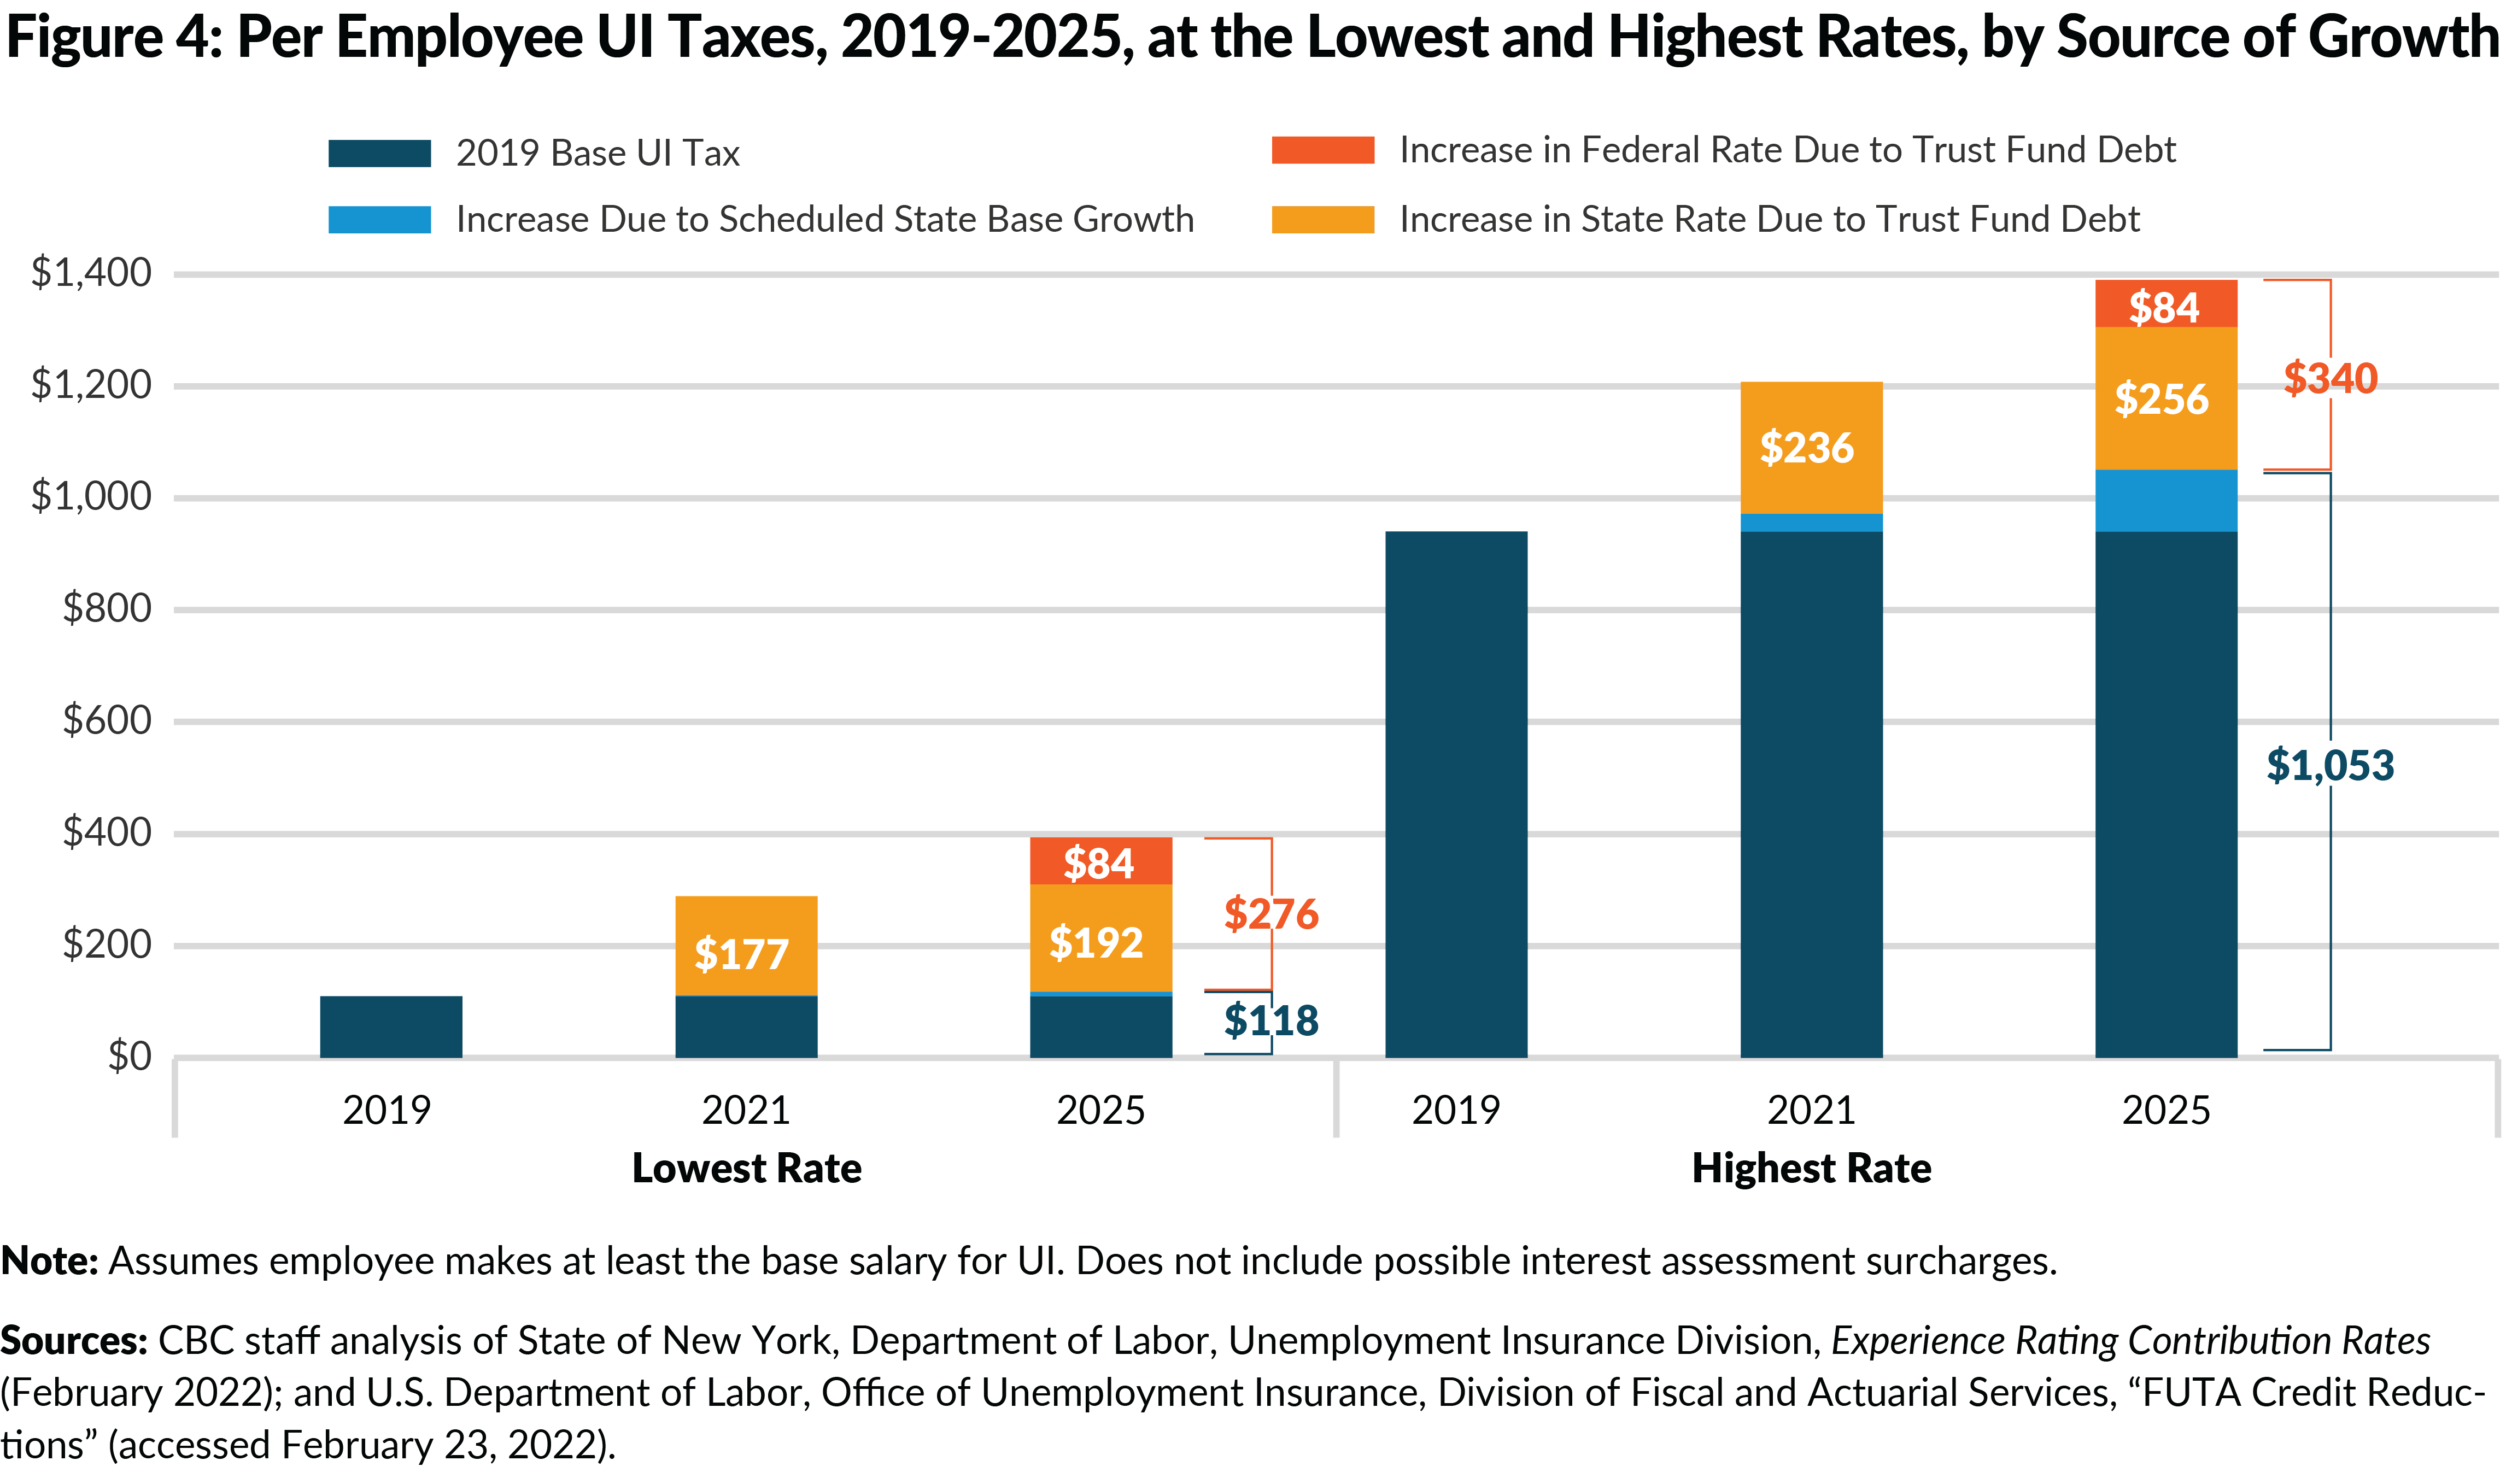 Figure 4: Per Employee UI Taxes, 2019-2025, at the Lowest and Highest Rates, by Source of Growth